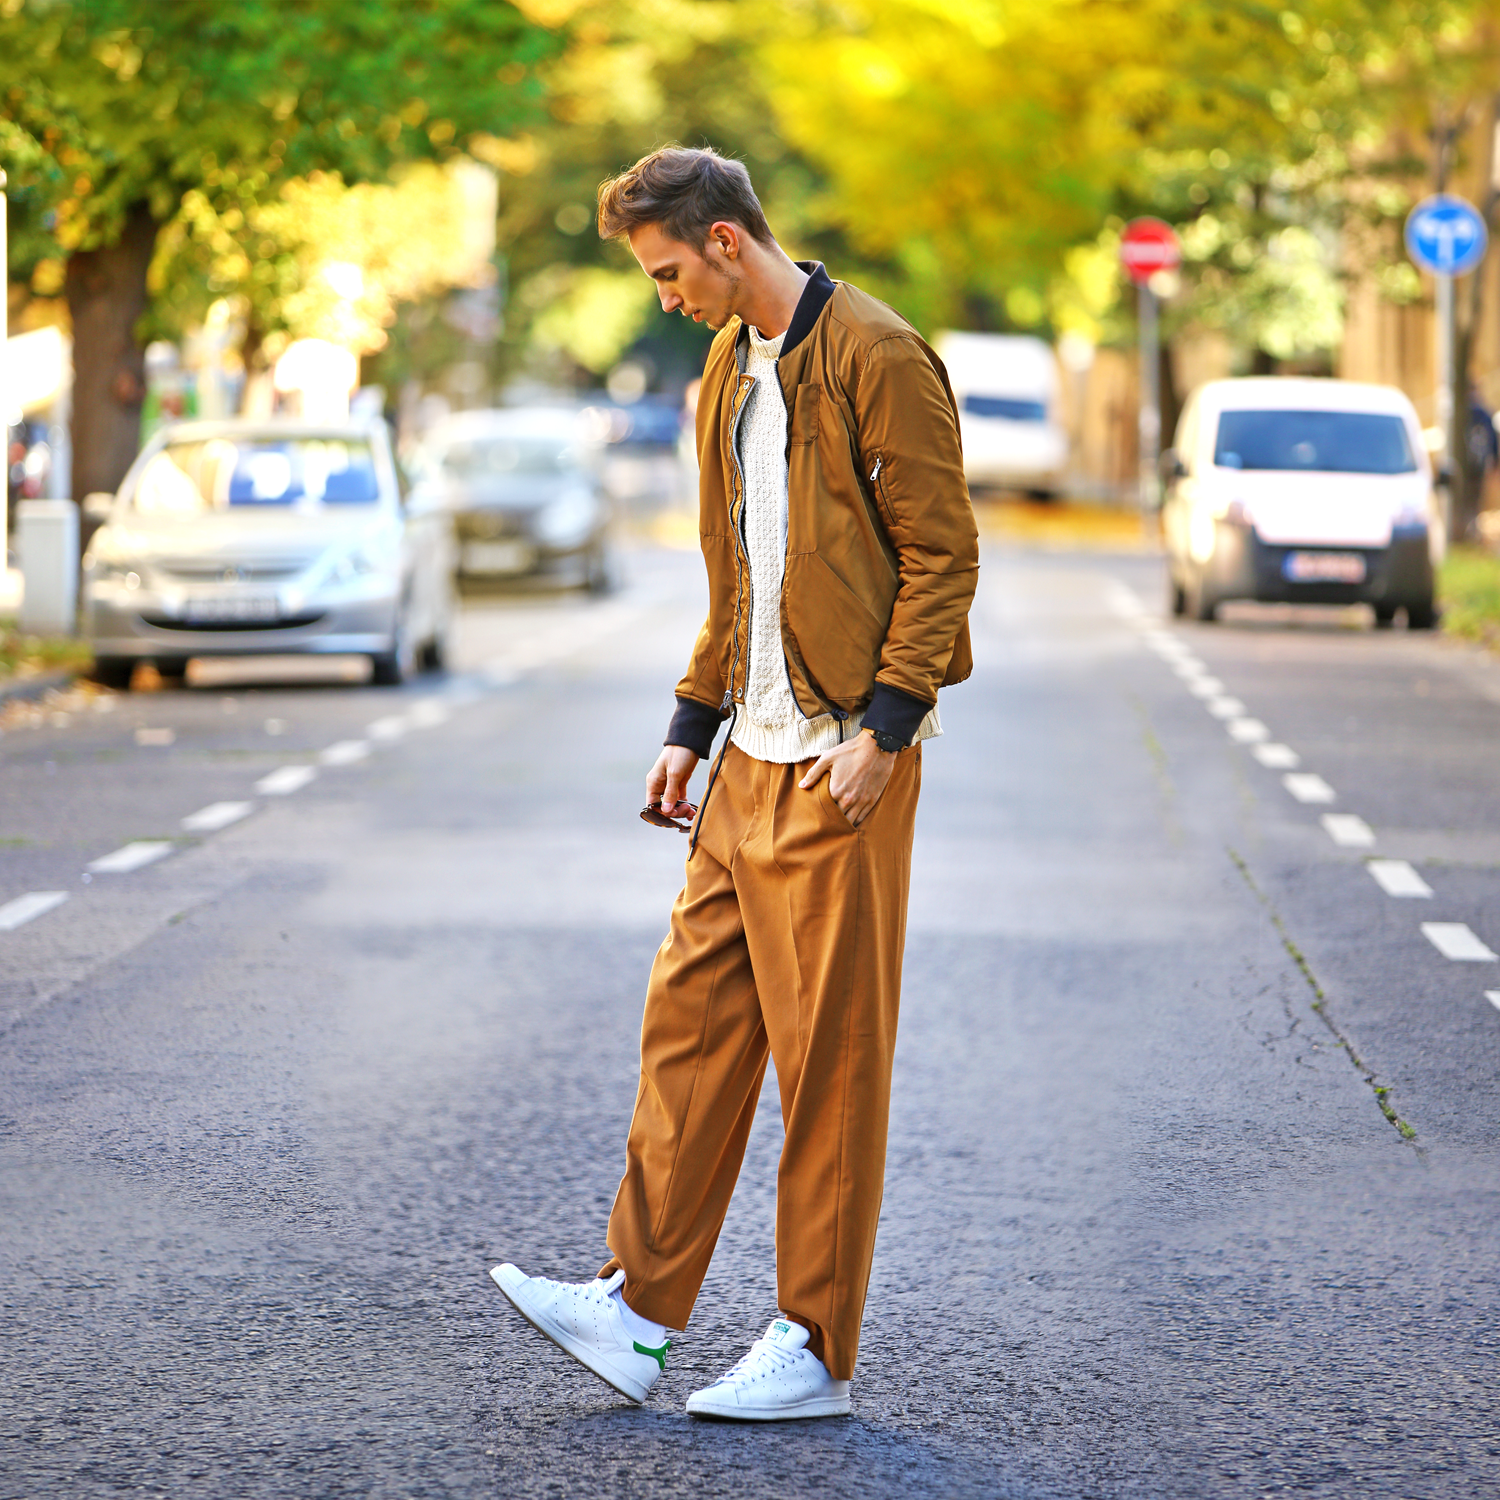 autumn-outfit-street-style-camel-brown-long-trousers-ferfidivat-divatblogger-fashion-blogger-hm-fall-winter_2.png